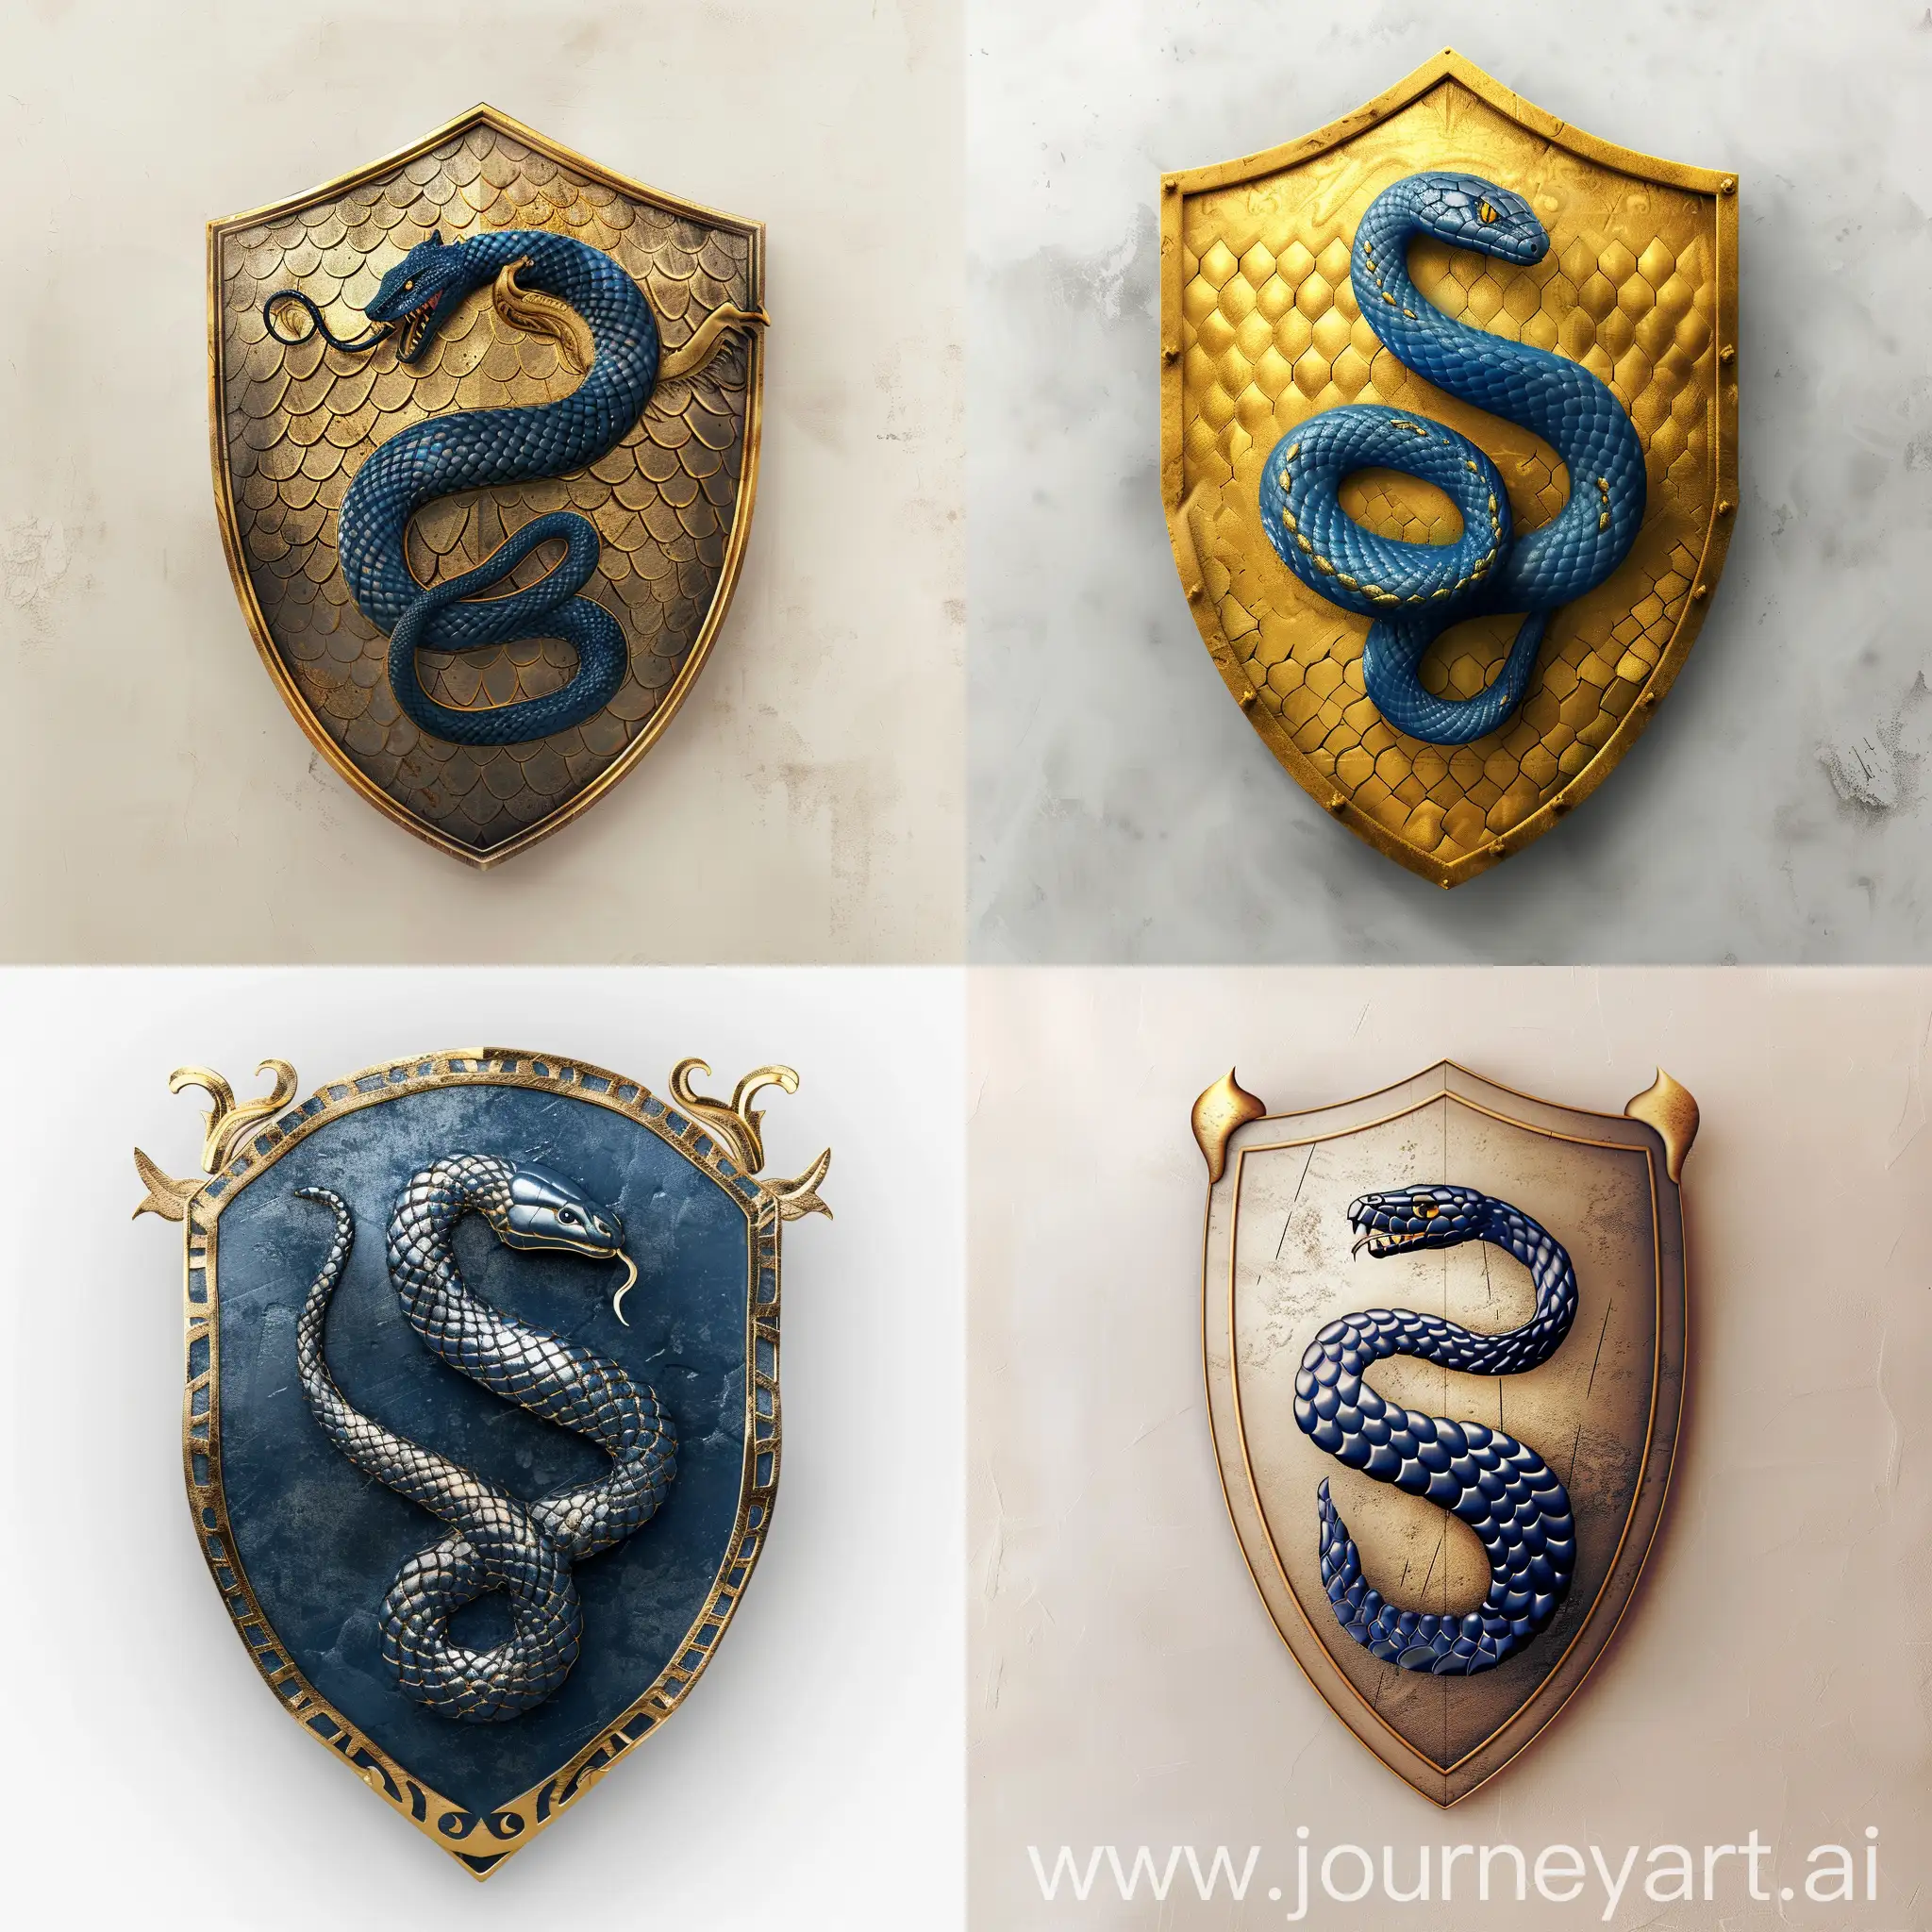 Modern-Heraldic-Coat-of-Arms-with-Blue-Snake-on-Golden-Shield